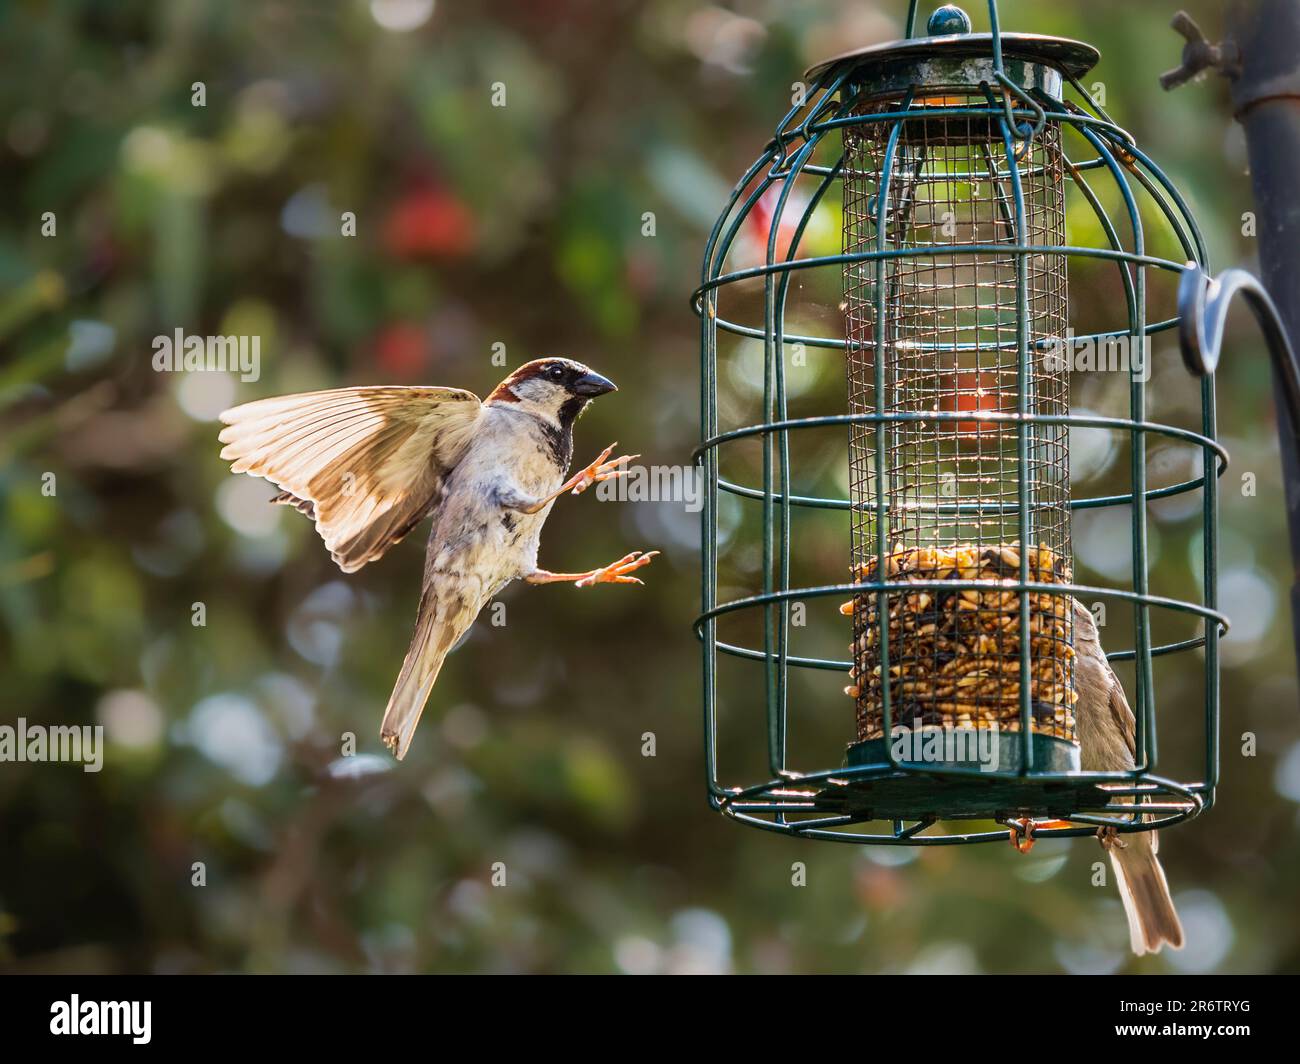 Male house sparrow, Passer domesticus, approaching a bird feeder with wings and legs outstretched ready for landing Stock Photo